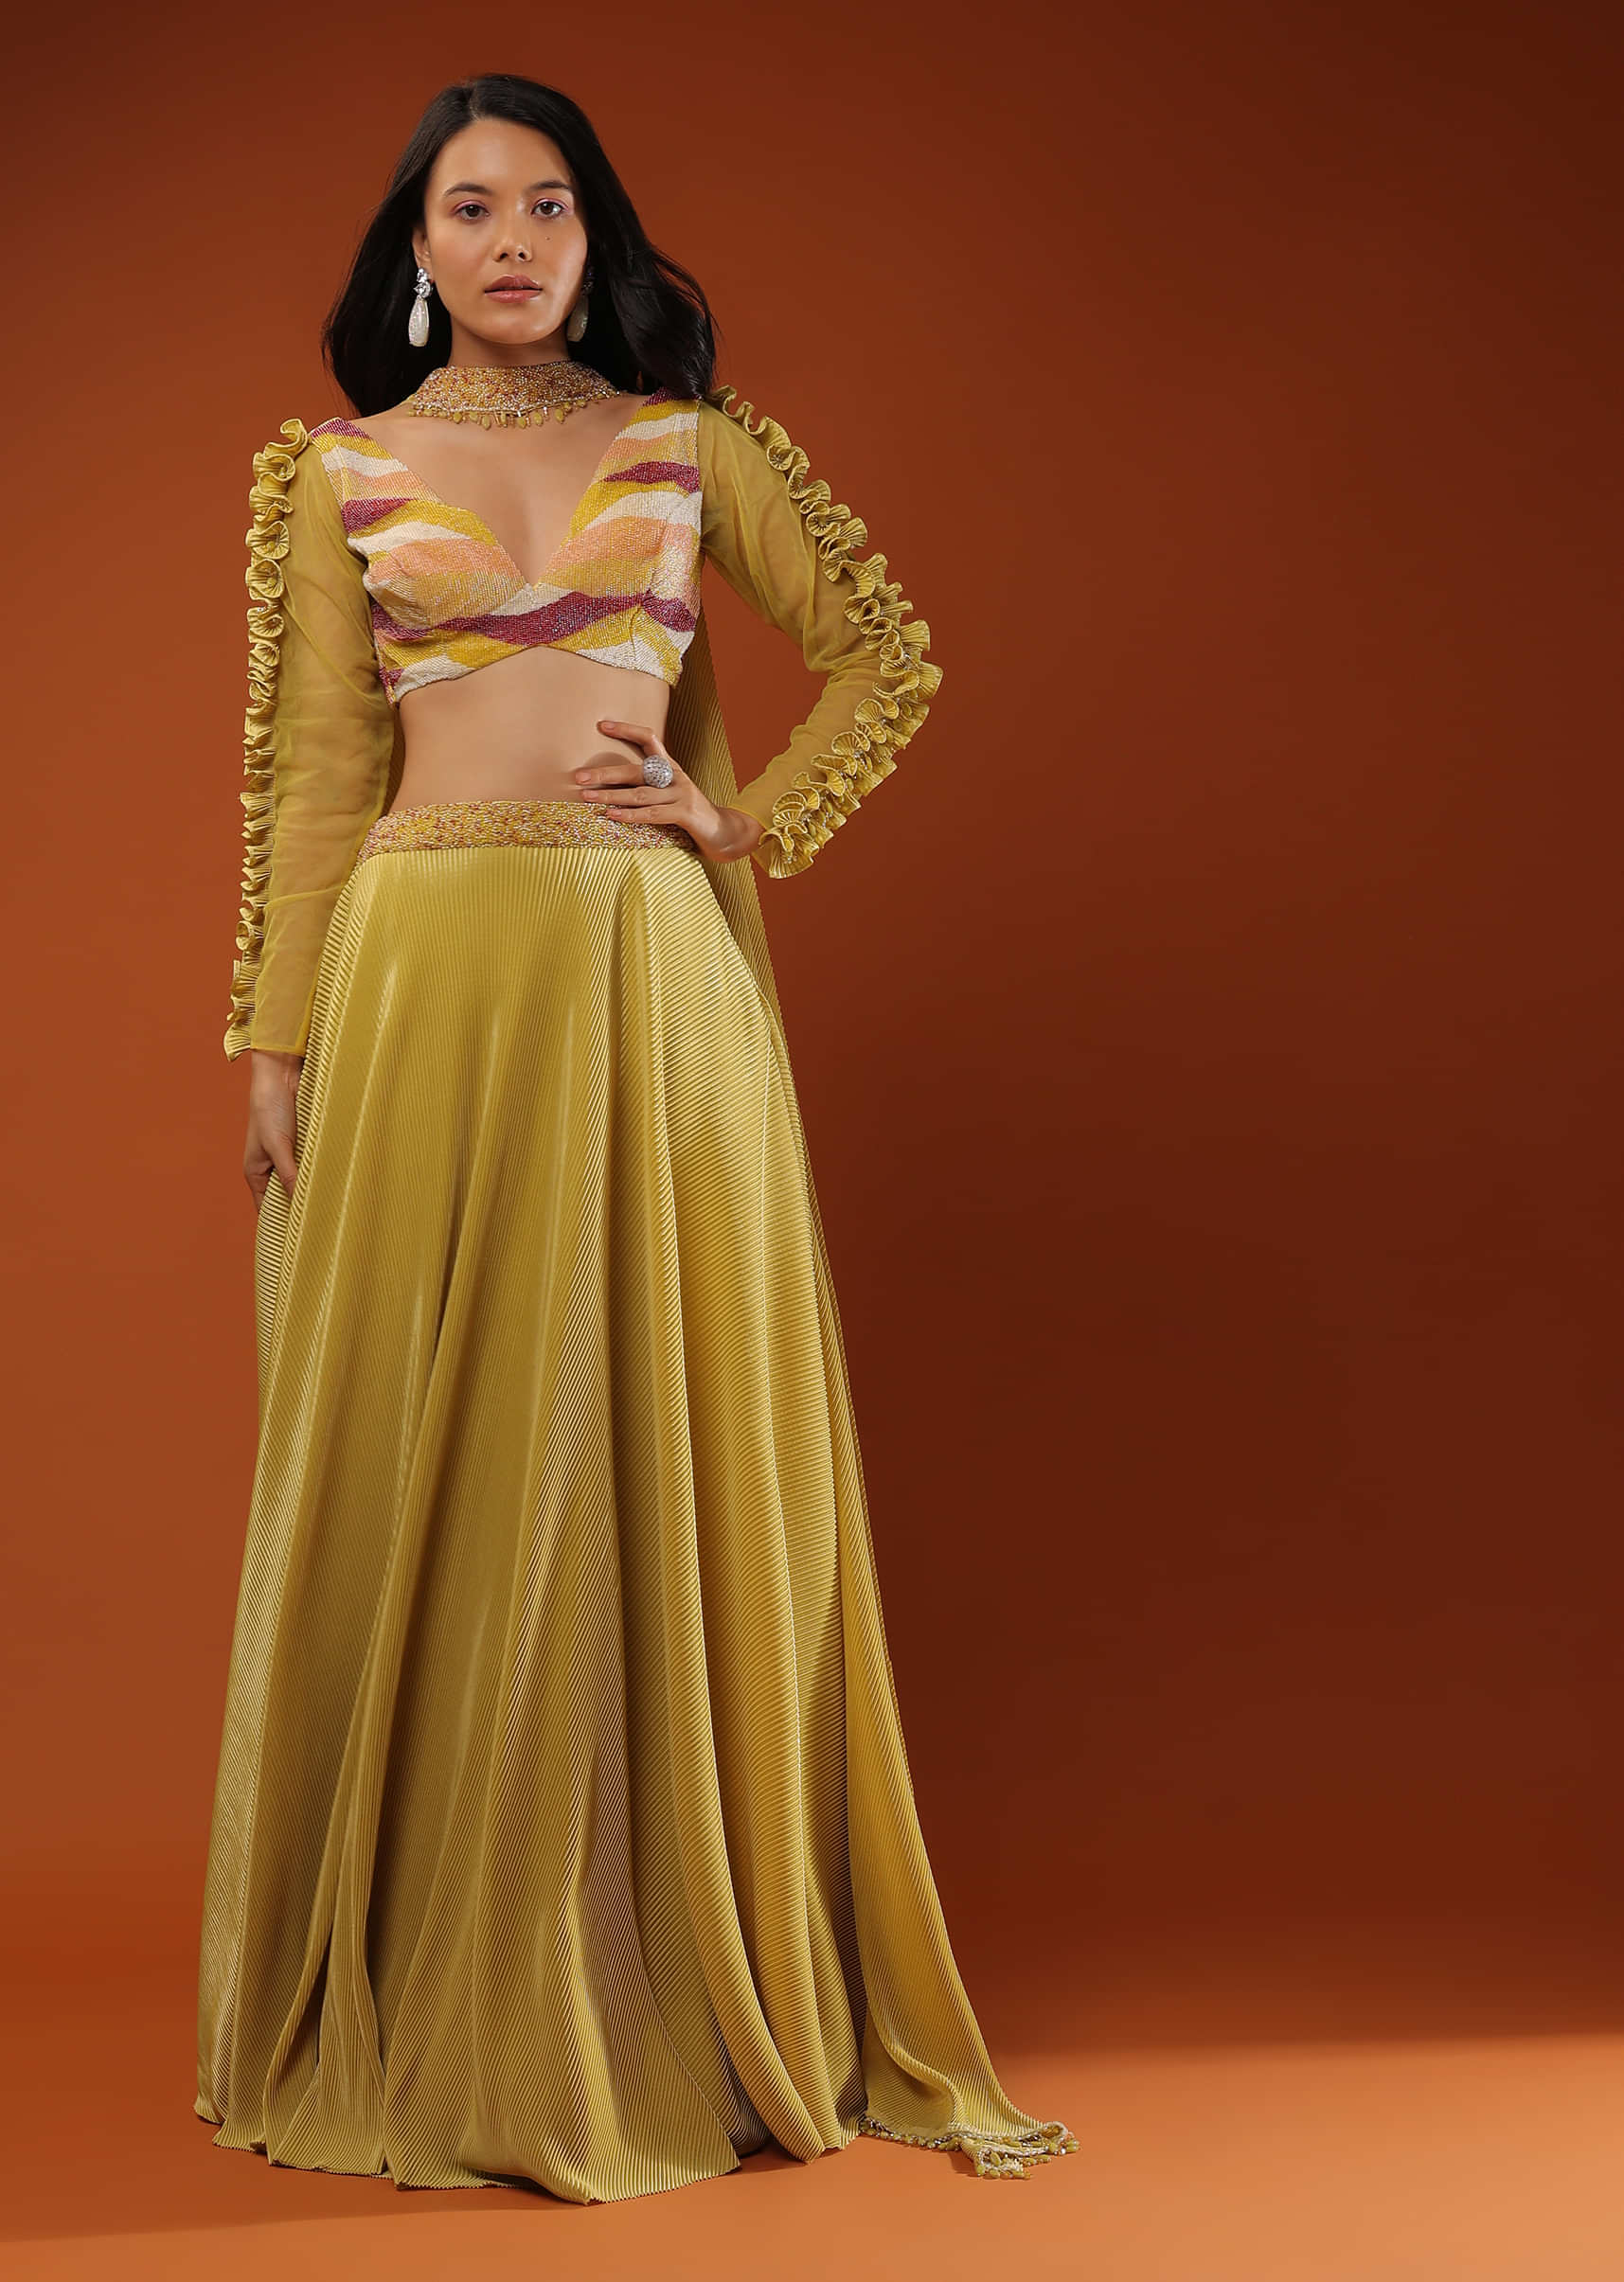 Mustard Yellow Lehenga And A Crop Top With Frills On The Top Of The Sleeves, Crafted In Crepe With Moti Embroidery